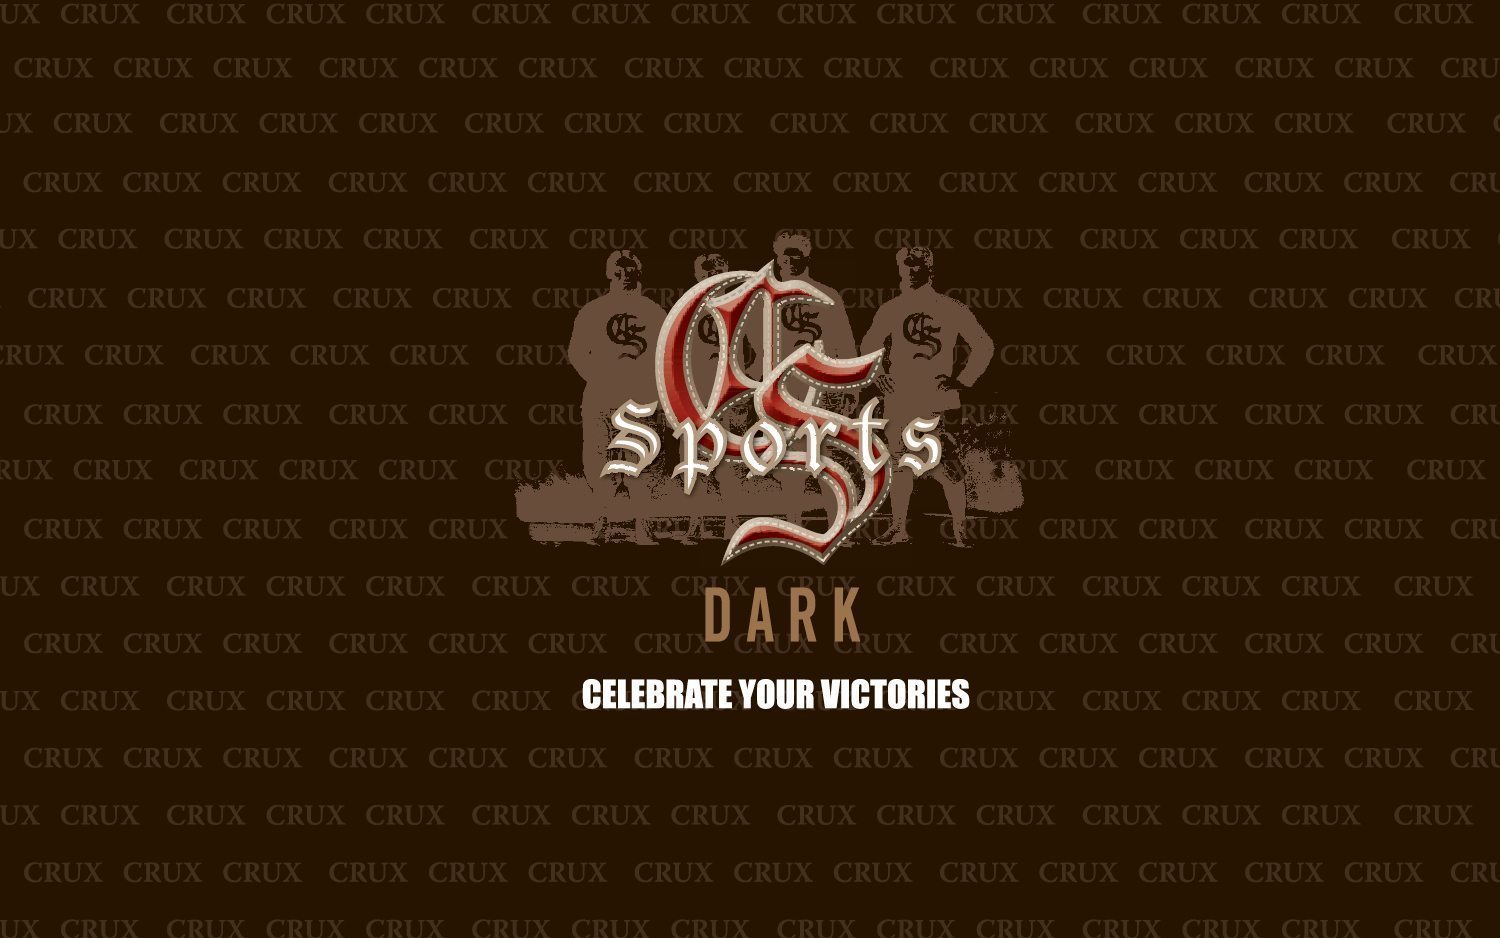 Cigar News: Crux Cigars Adds “Dark” Line Extensions For Sports & Skeeterz Brands